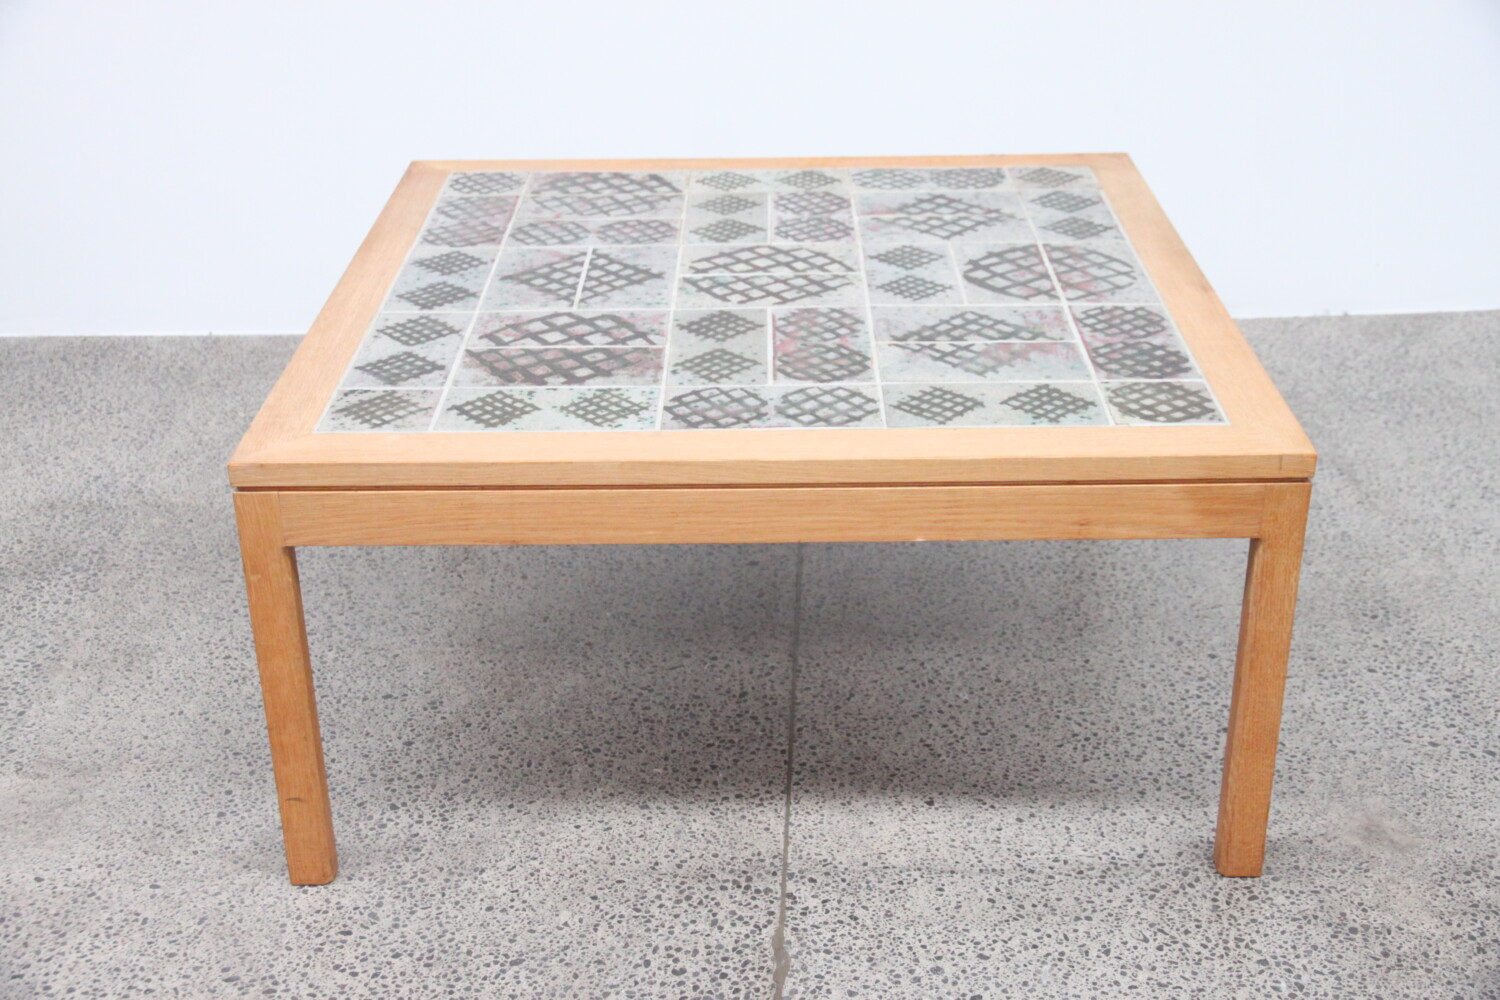 Extra Large Oak Coffee Table With Mosaic Tiles